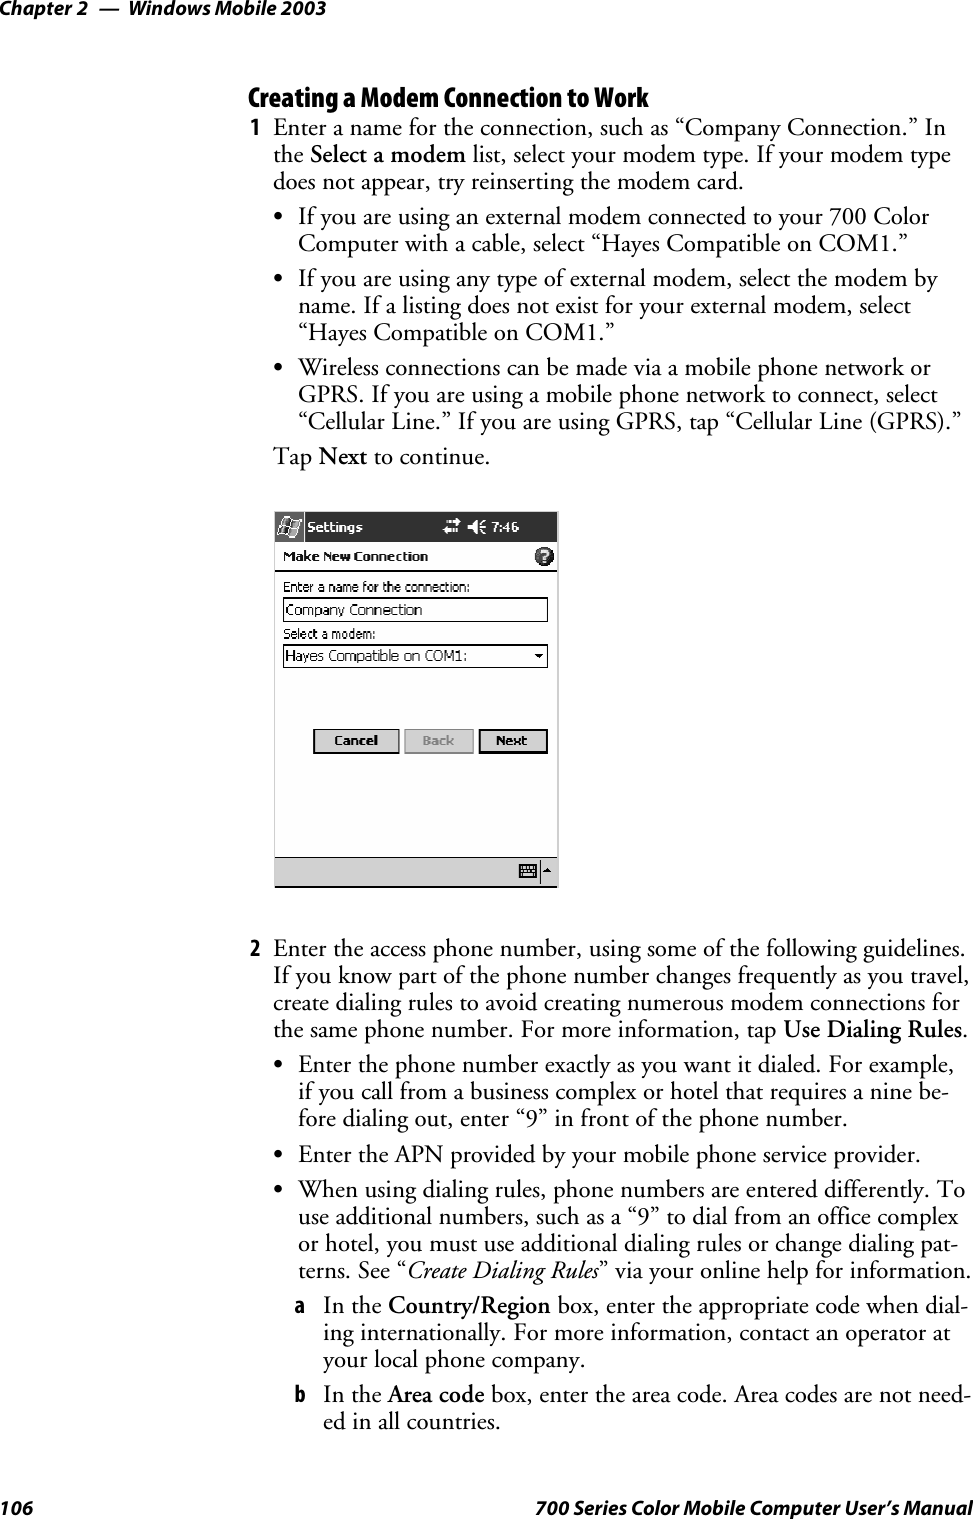 Windows Mobile 2003Chapter —2106 700 Series Color Mobile Computer User’s ManualCreating a Modem Connection to Work1Enter a name for the connection, such as “Company Connection.” Inthe Select a modem list, select your modem type. If your modem typedoes not appear, try reinserting the modem card.SIf you are using an external modem connected to your 700 ColorComputer with a cable, select “Hayes Compatible on COM1.”SIf you are using any type of external modem, select the modem byname. If a listing does not exist for your external modem, select“Hayes Compatible on COM1.”SWireless connections can be made via a mobile phone network orGPRS. If you are using a mobile phone network to connect, select“Cellular Line.” If you are using GPRS, tap “Cellular Line (GPRS).”Tap Next to continue.2Enter the access phone number, using some of the following guidelines.If you know part of the phone number changes frequently as you travel,create dialing rules to avoid creating numerous modem connections forthe same phone number. For more information, tap Use Dialing Rules.SEnter the phone number exactly as you want it dialed. For example,if you call from a business complex or hotel that requires a nine be-fore dialing out, enter “9” in front of the phone number.SEnter the APN provided by your mobile phone service provider.SWhen using dialing rules, phone numbers are entered differently. Touse additional numbers, such as a “9” to dial from an office complexor hotel, you must use additional dialing rules or change dialing pat-terns. See “Create Dialing Rules” via your online help for information.aIn the Country/Region box, enter the appropriate code when dial-ing internationally. For more information, contact an operator atyour local phone company.bIn the Area code box, enter the area code. Area codes are not need-ed in all countries.